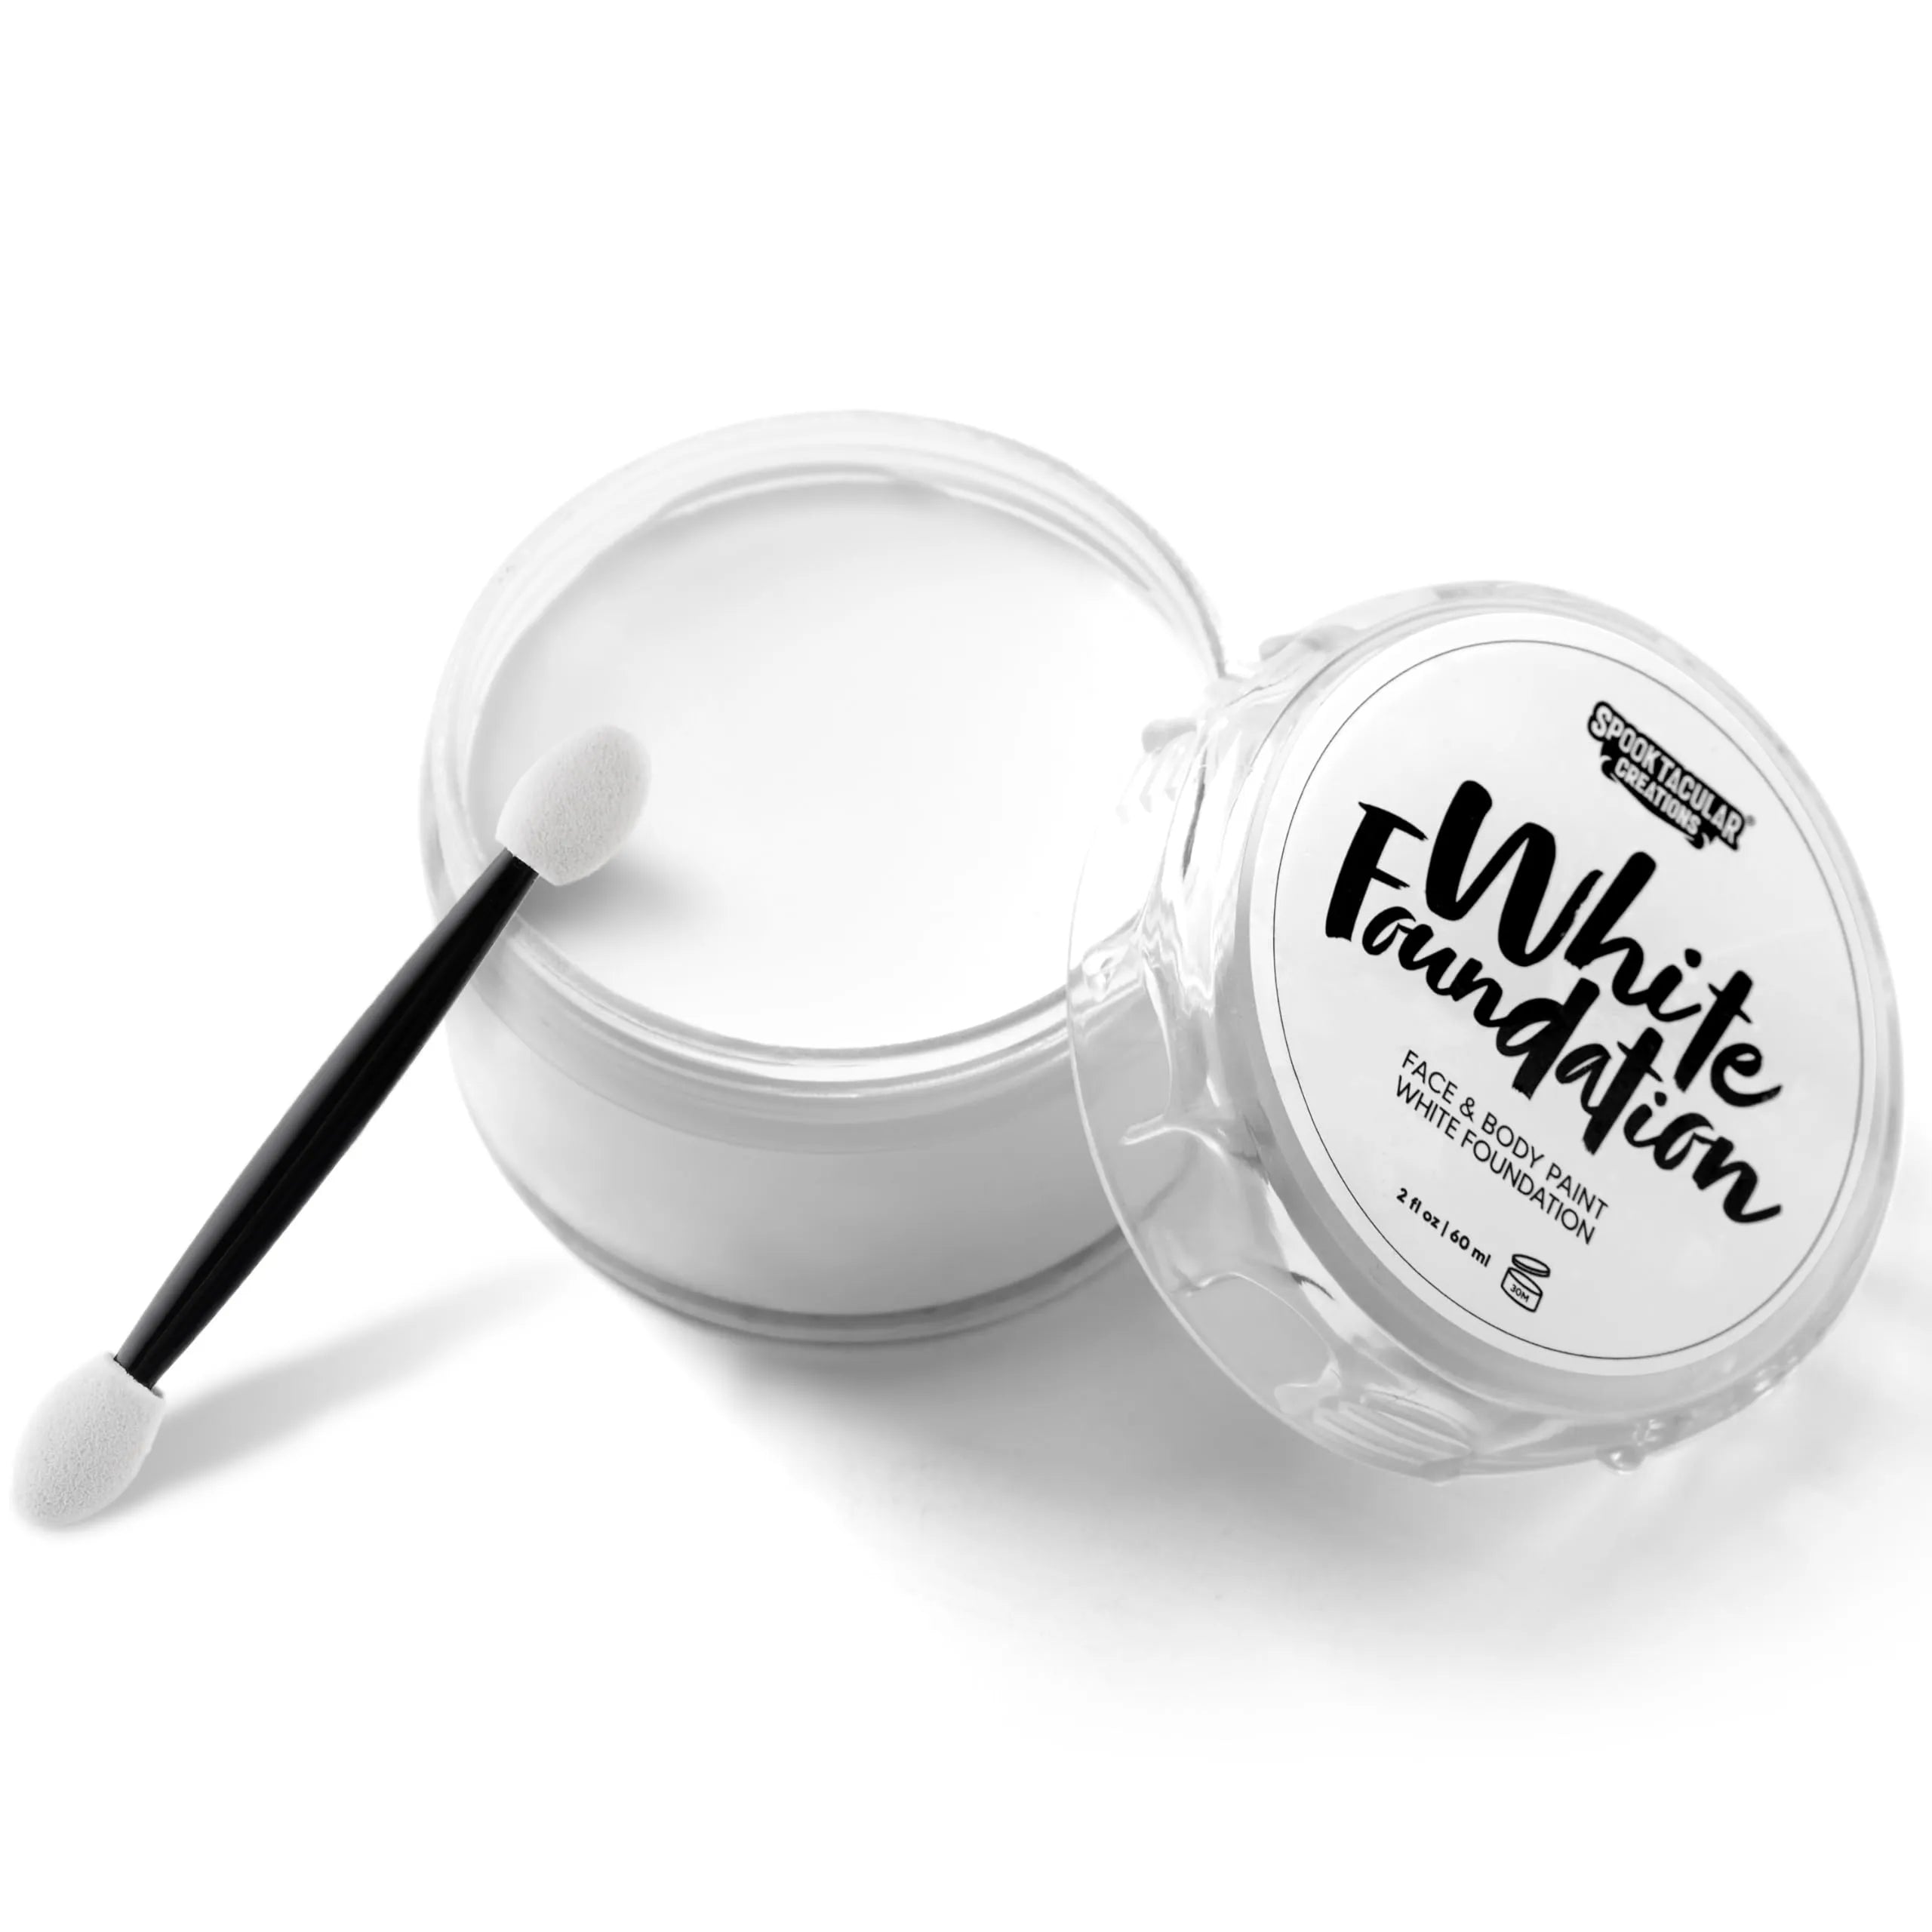 White Body Paint for Halloween - 3.4 Fl.oz. (1 Pc.) - Vibrant &  Easy-to-Apply Costume Makeup, Perfect for Props and Parties